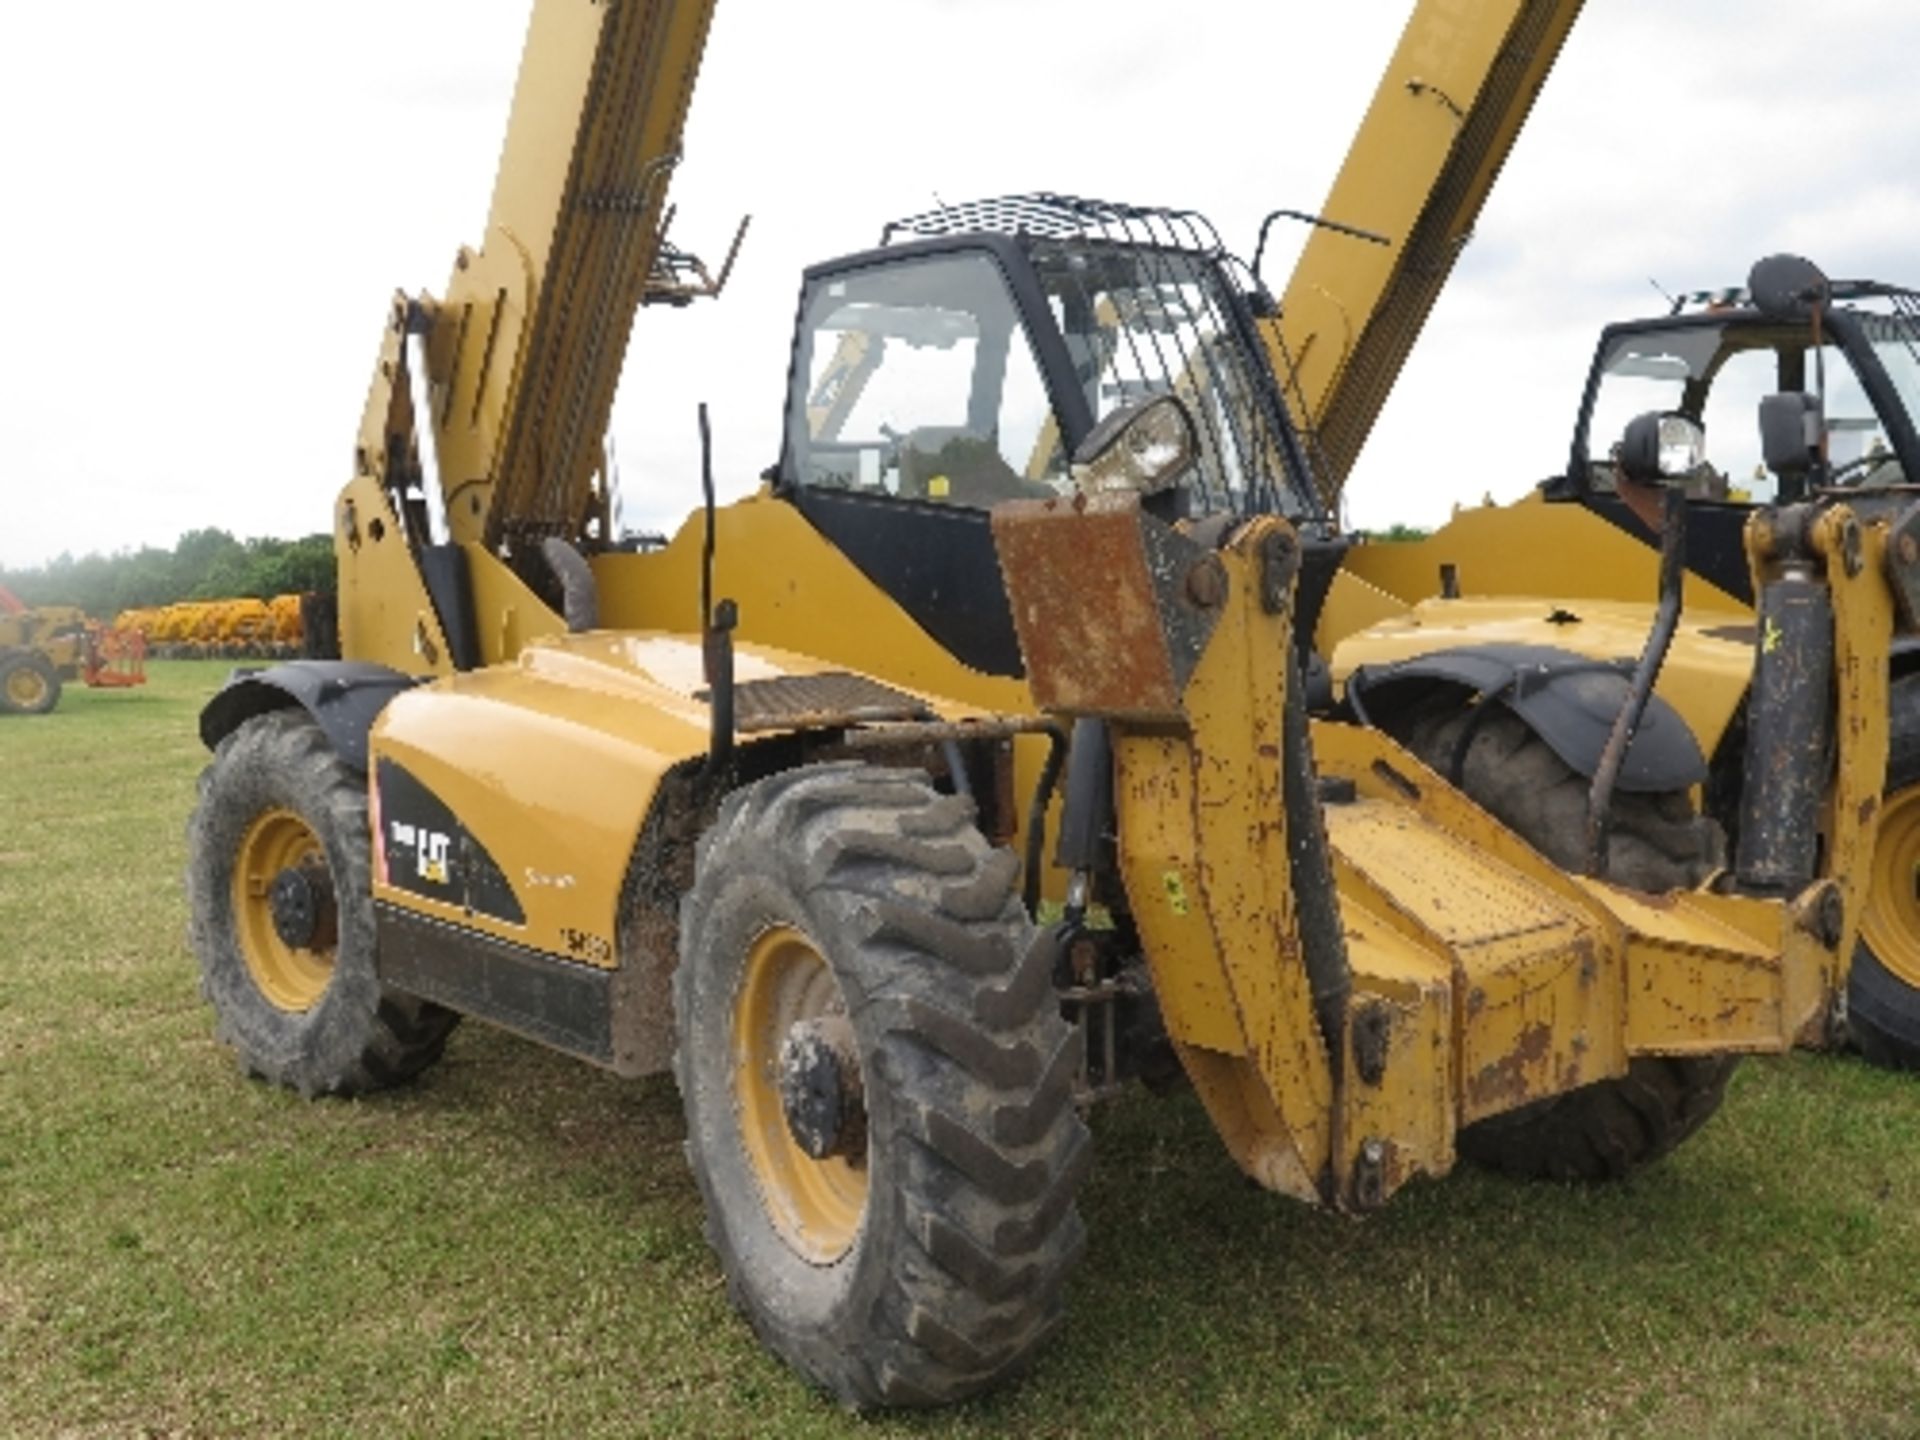 Caterpillar TH580B telehandler 4130 hrs 2007 154390
2 MUDGUARDS MISSING ALL LOTS are SOLD AS SEEN - Image 2 of 7